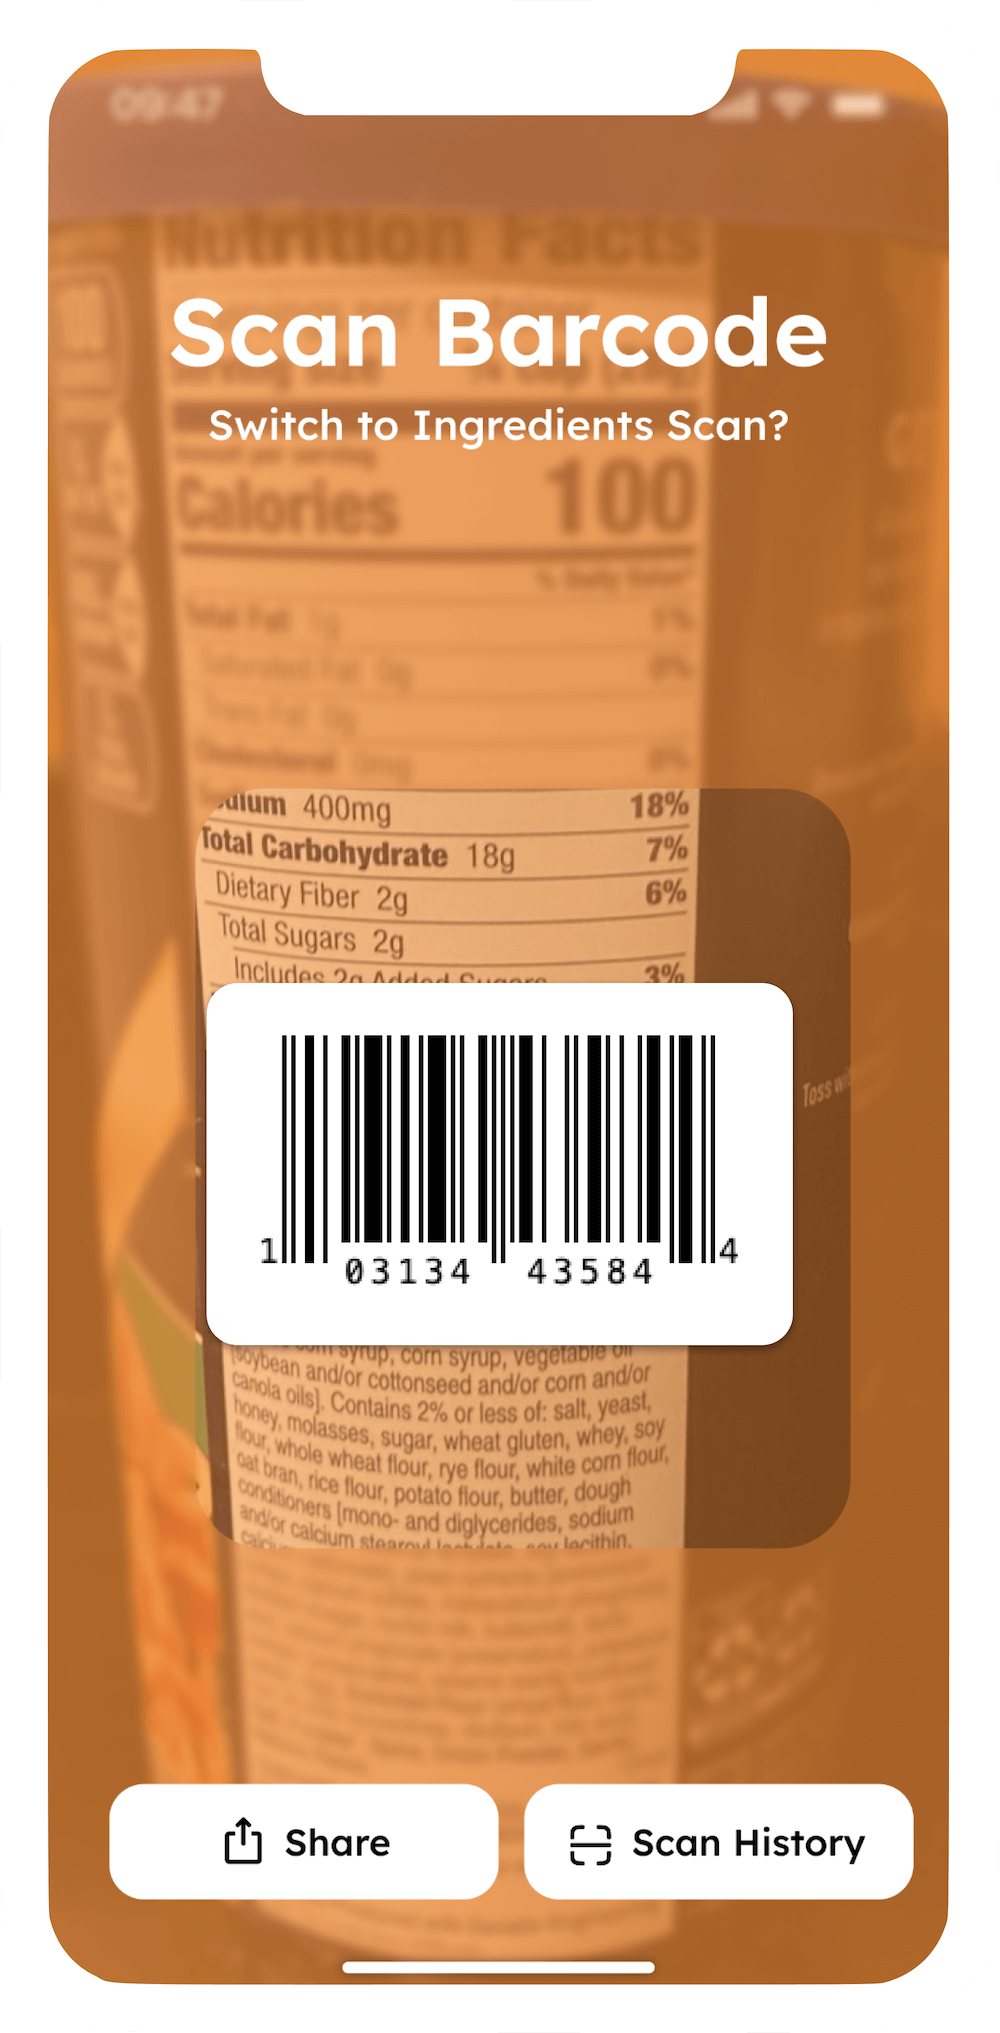 Barcode Scanner Detecting ultra-processed foods.